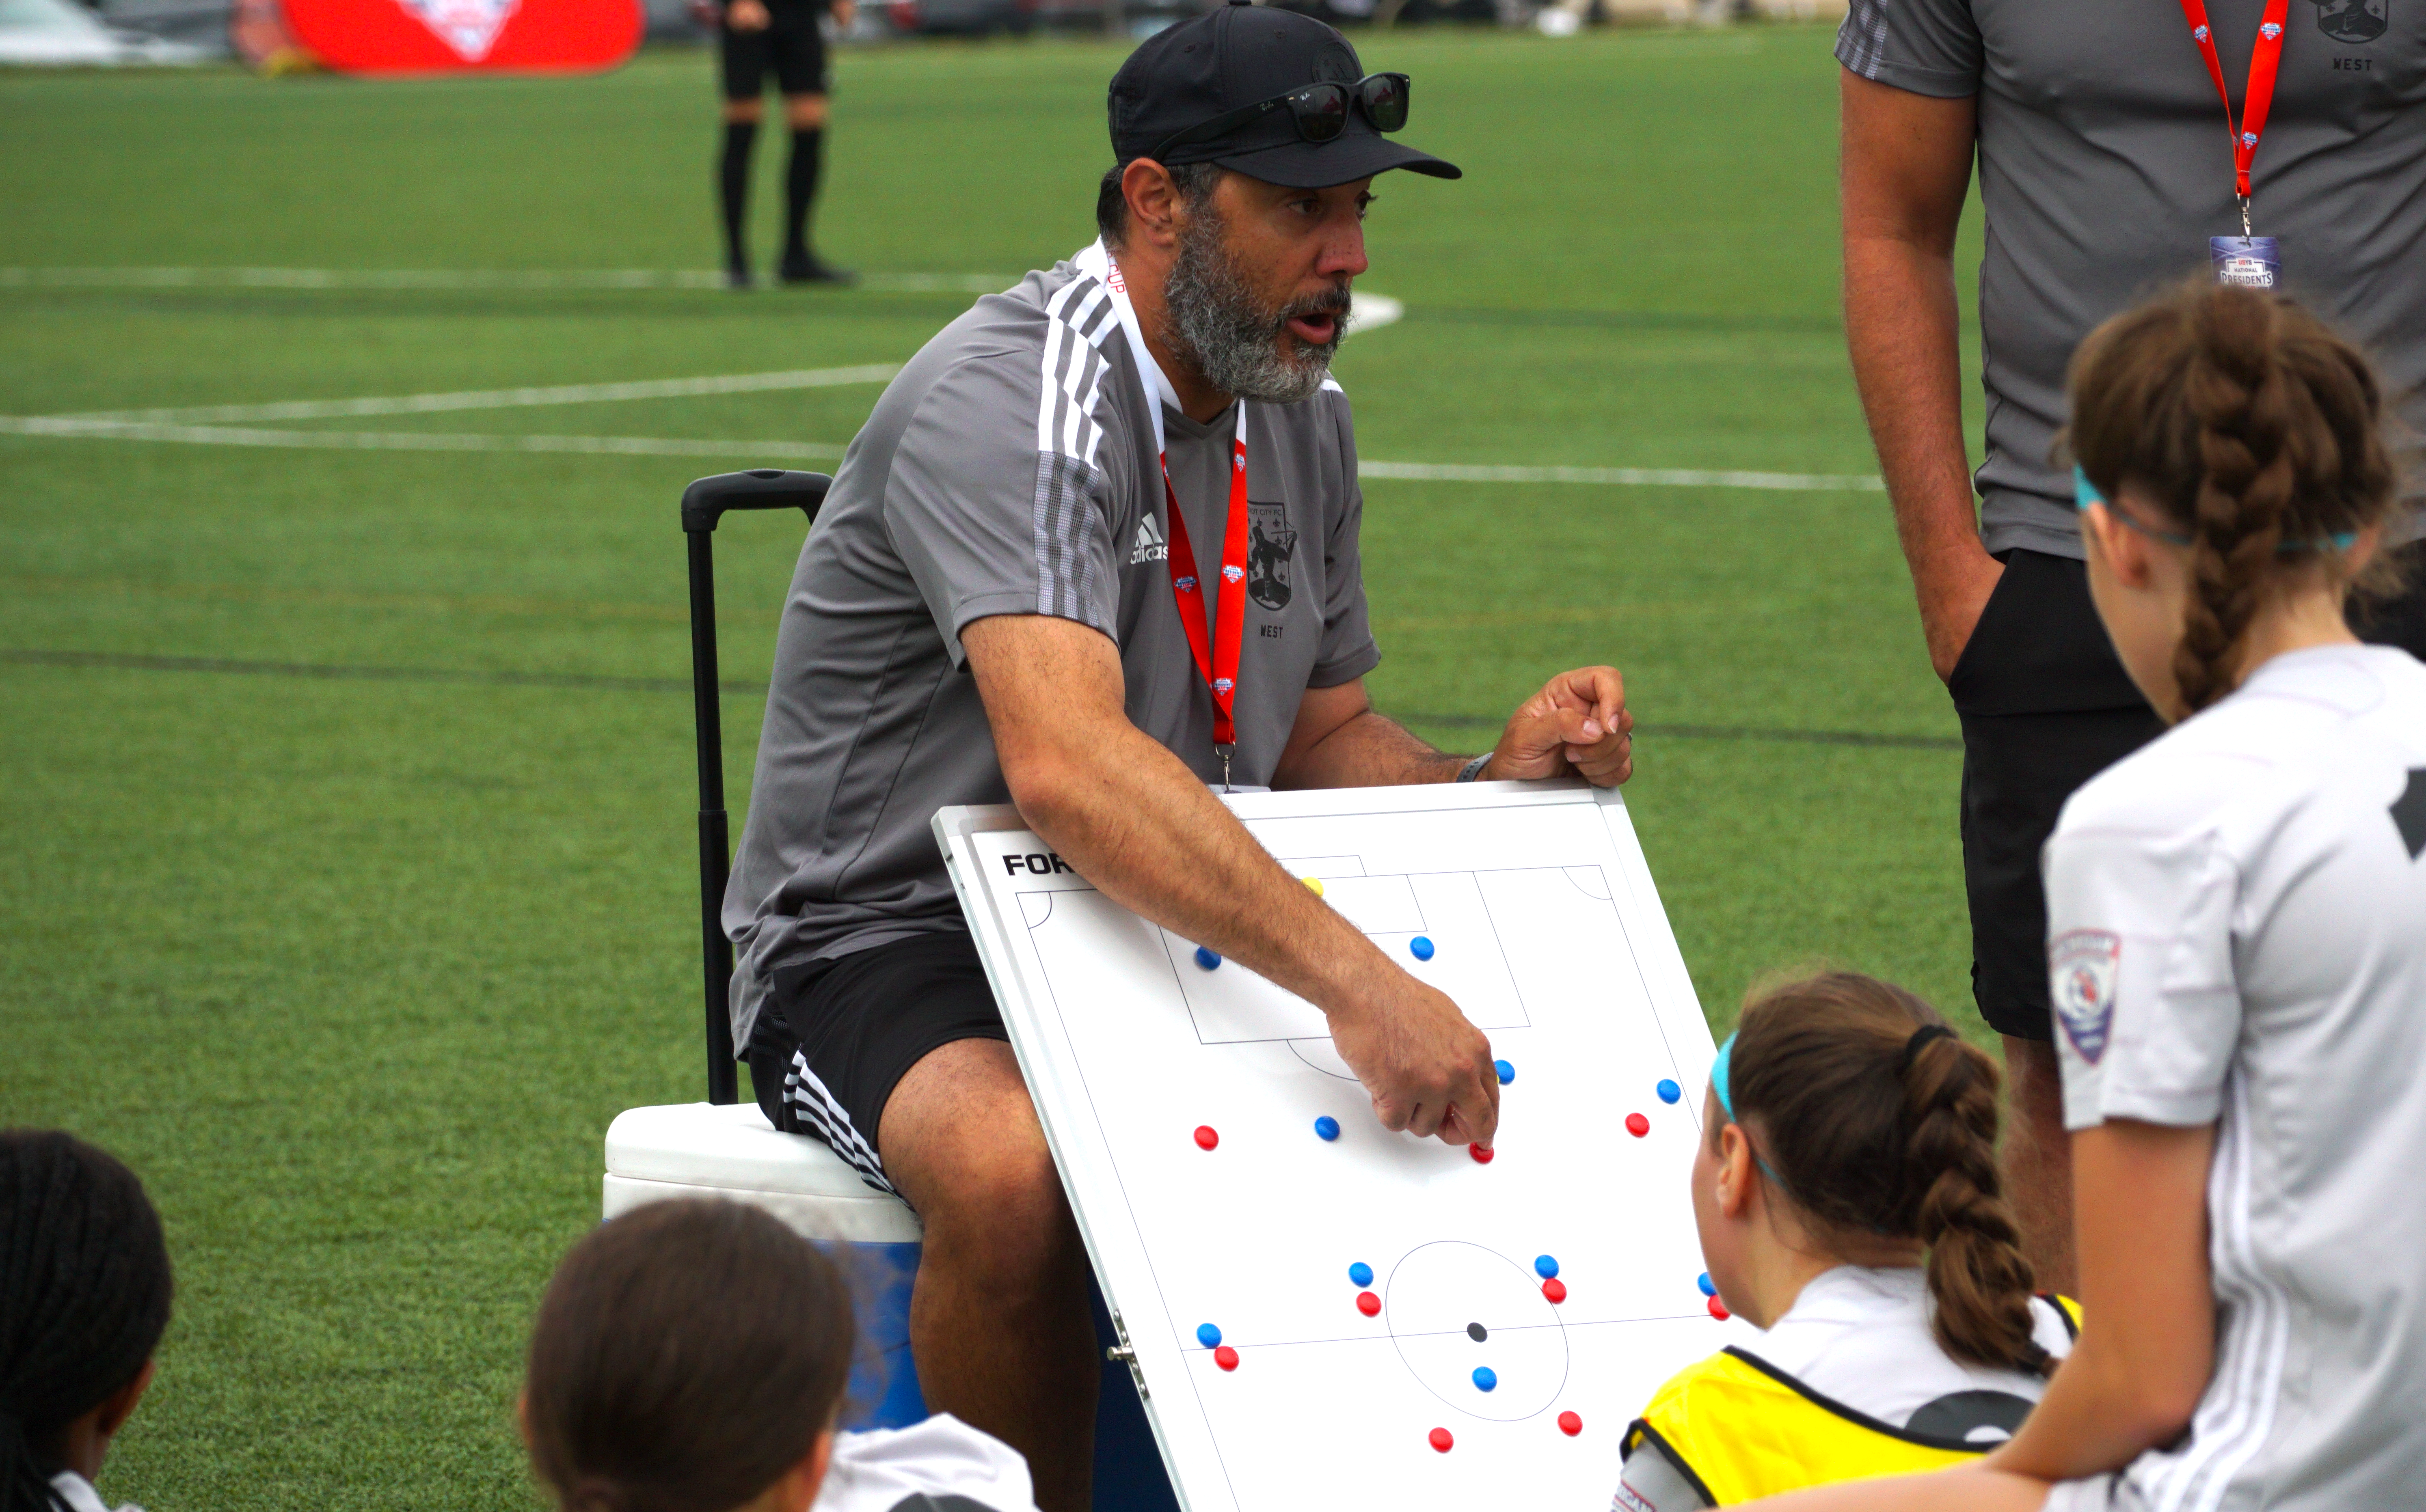 US Youth Soccer to Offer U.S. Soccer 'B' License Education featured image